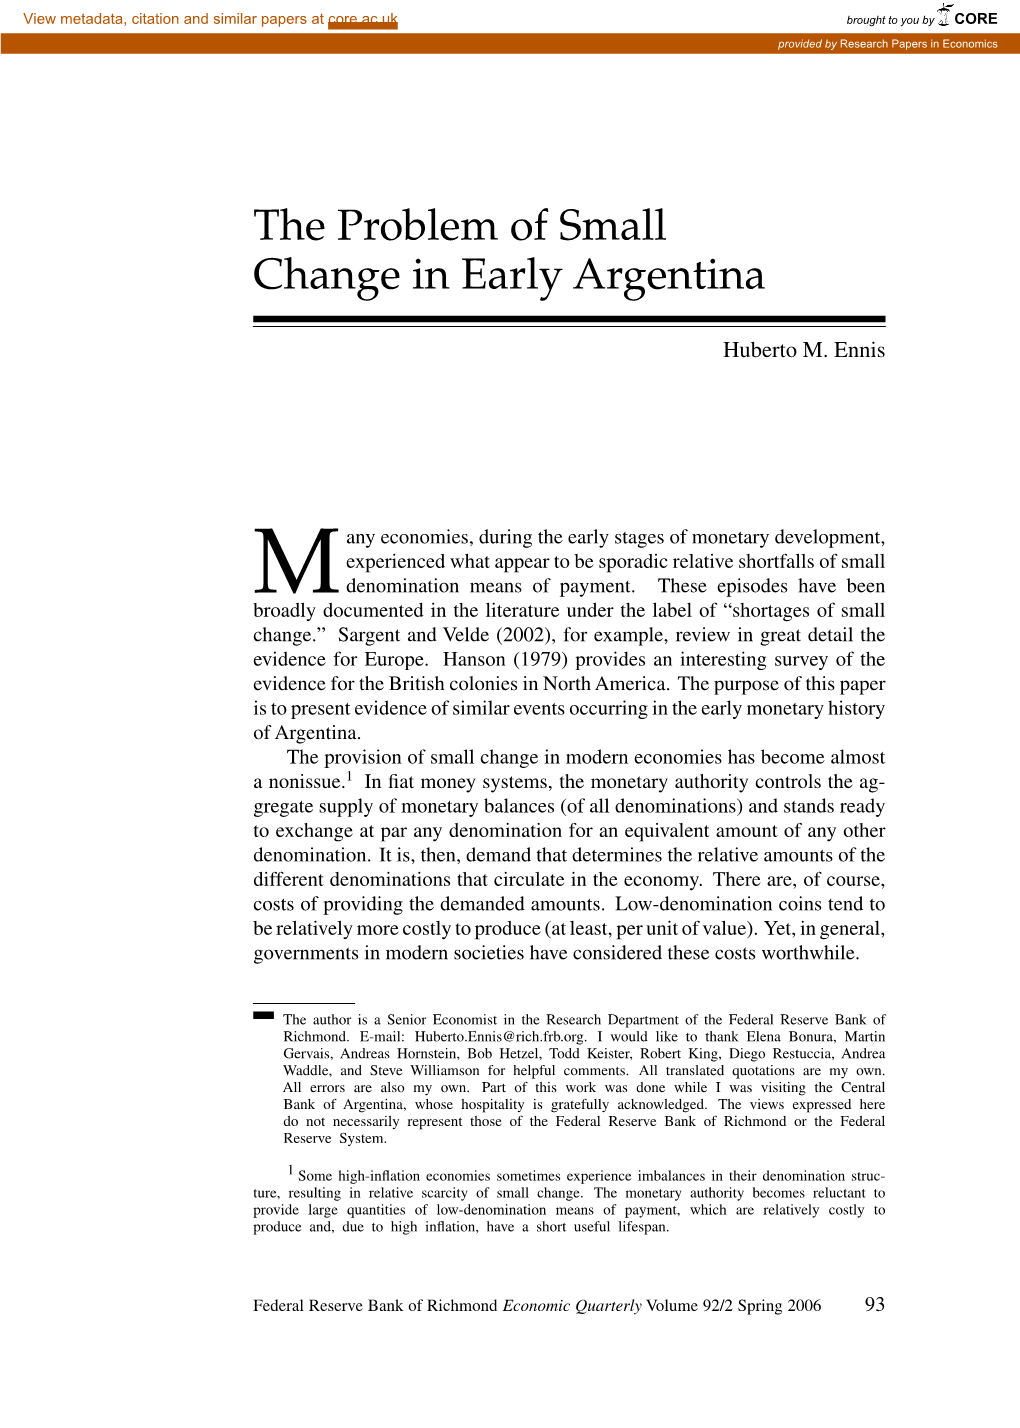 The Problem of Small Change in Early Argentina